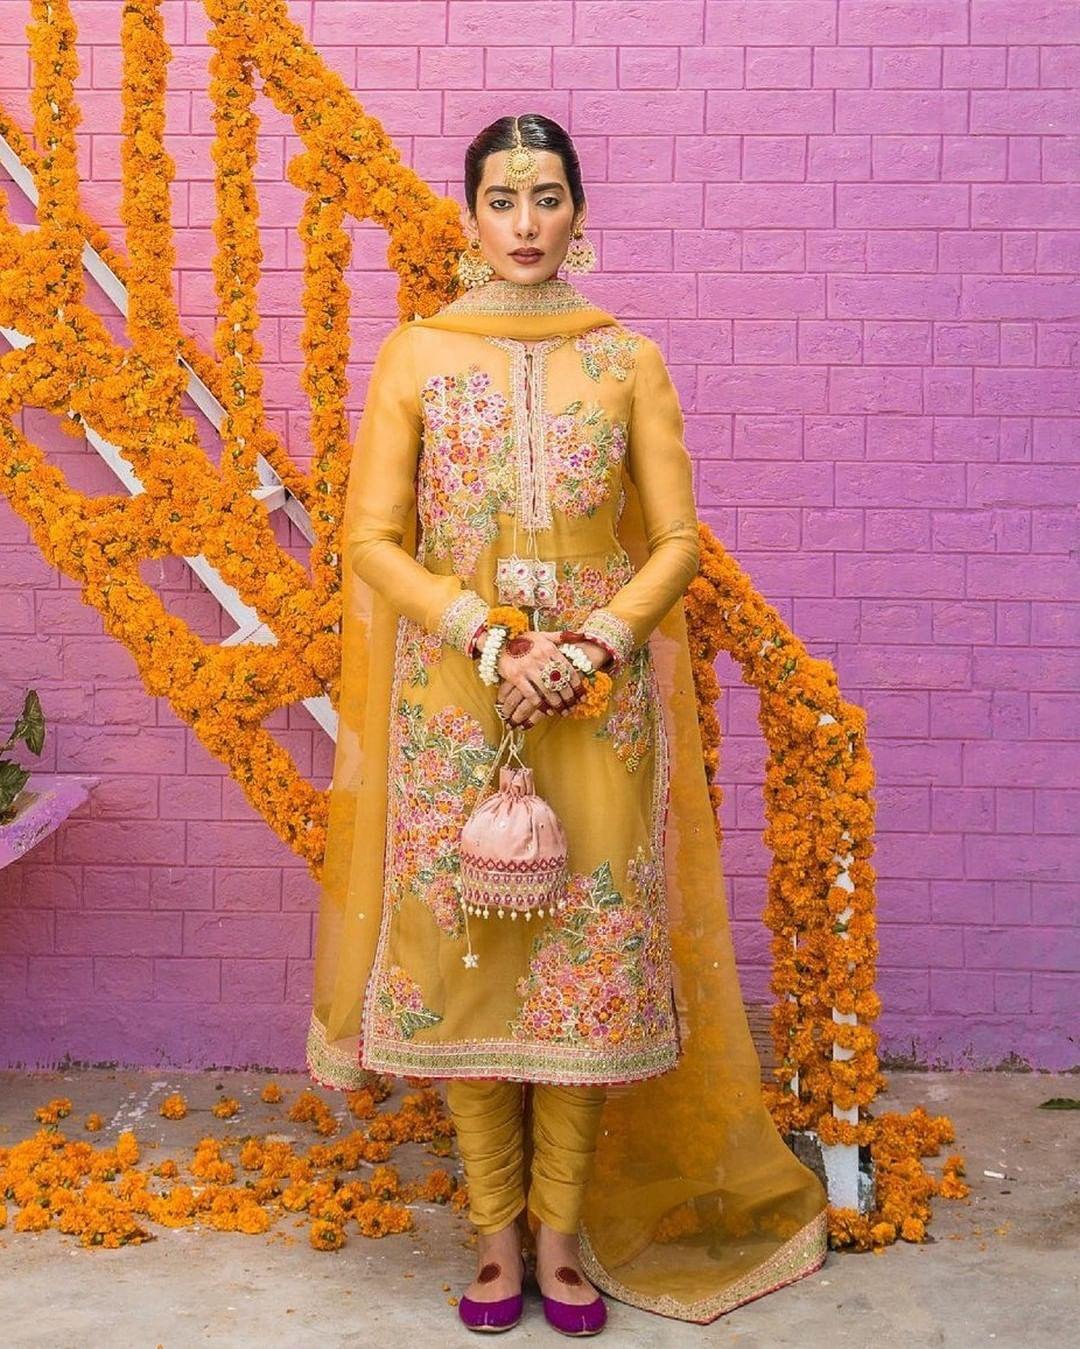 Mayun outfit inspo for brides sister/ cousin | Haldi dress, Haldi function  dress, Function dresses